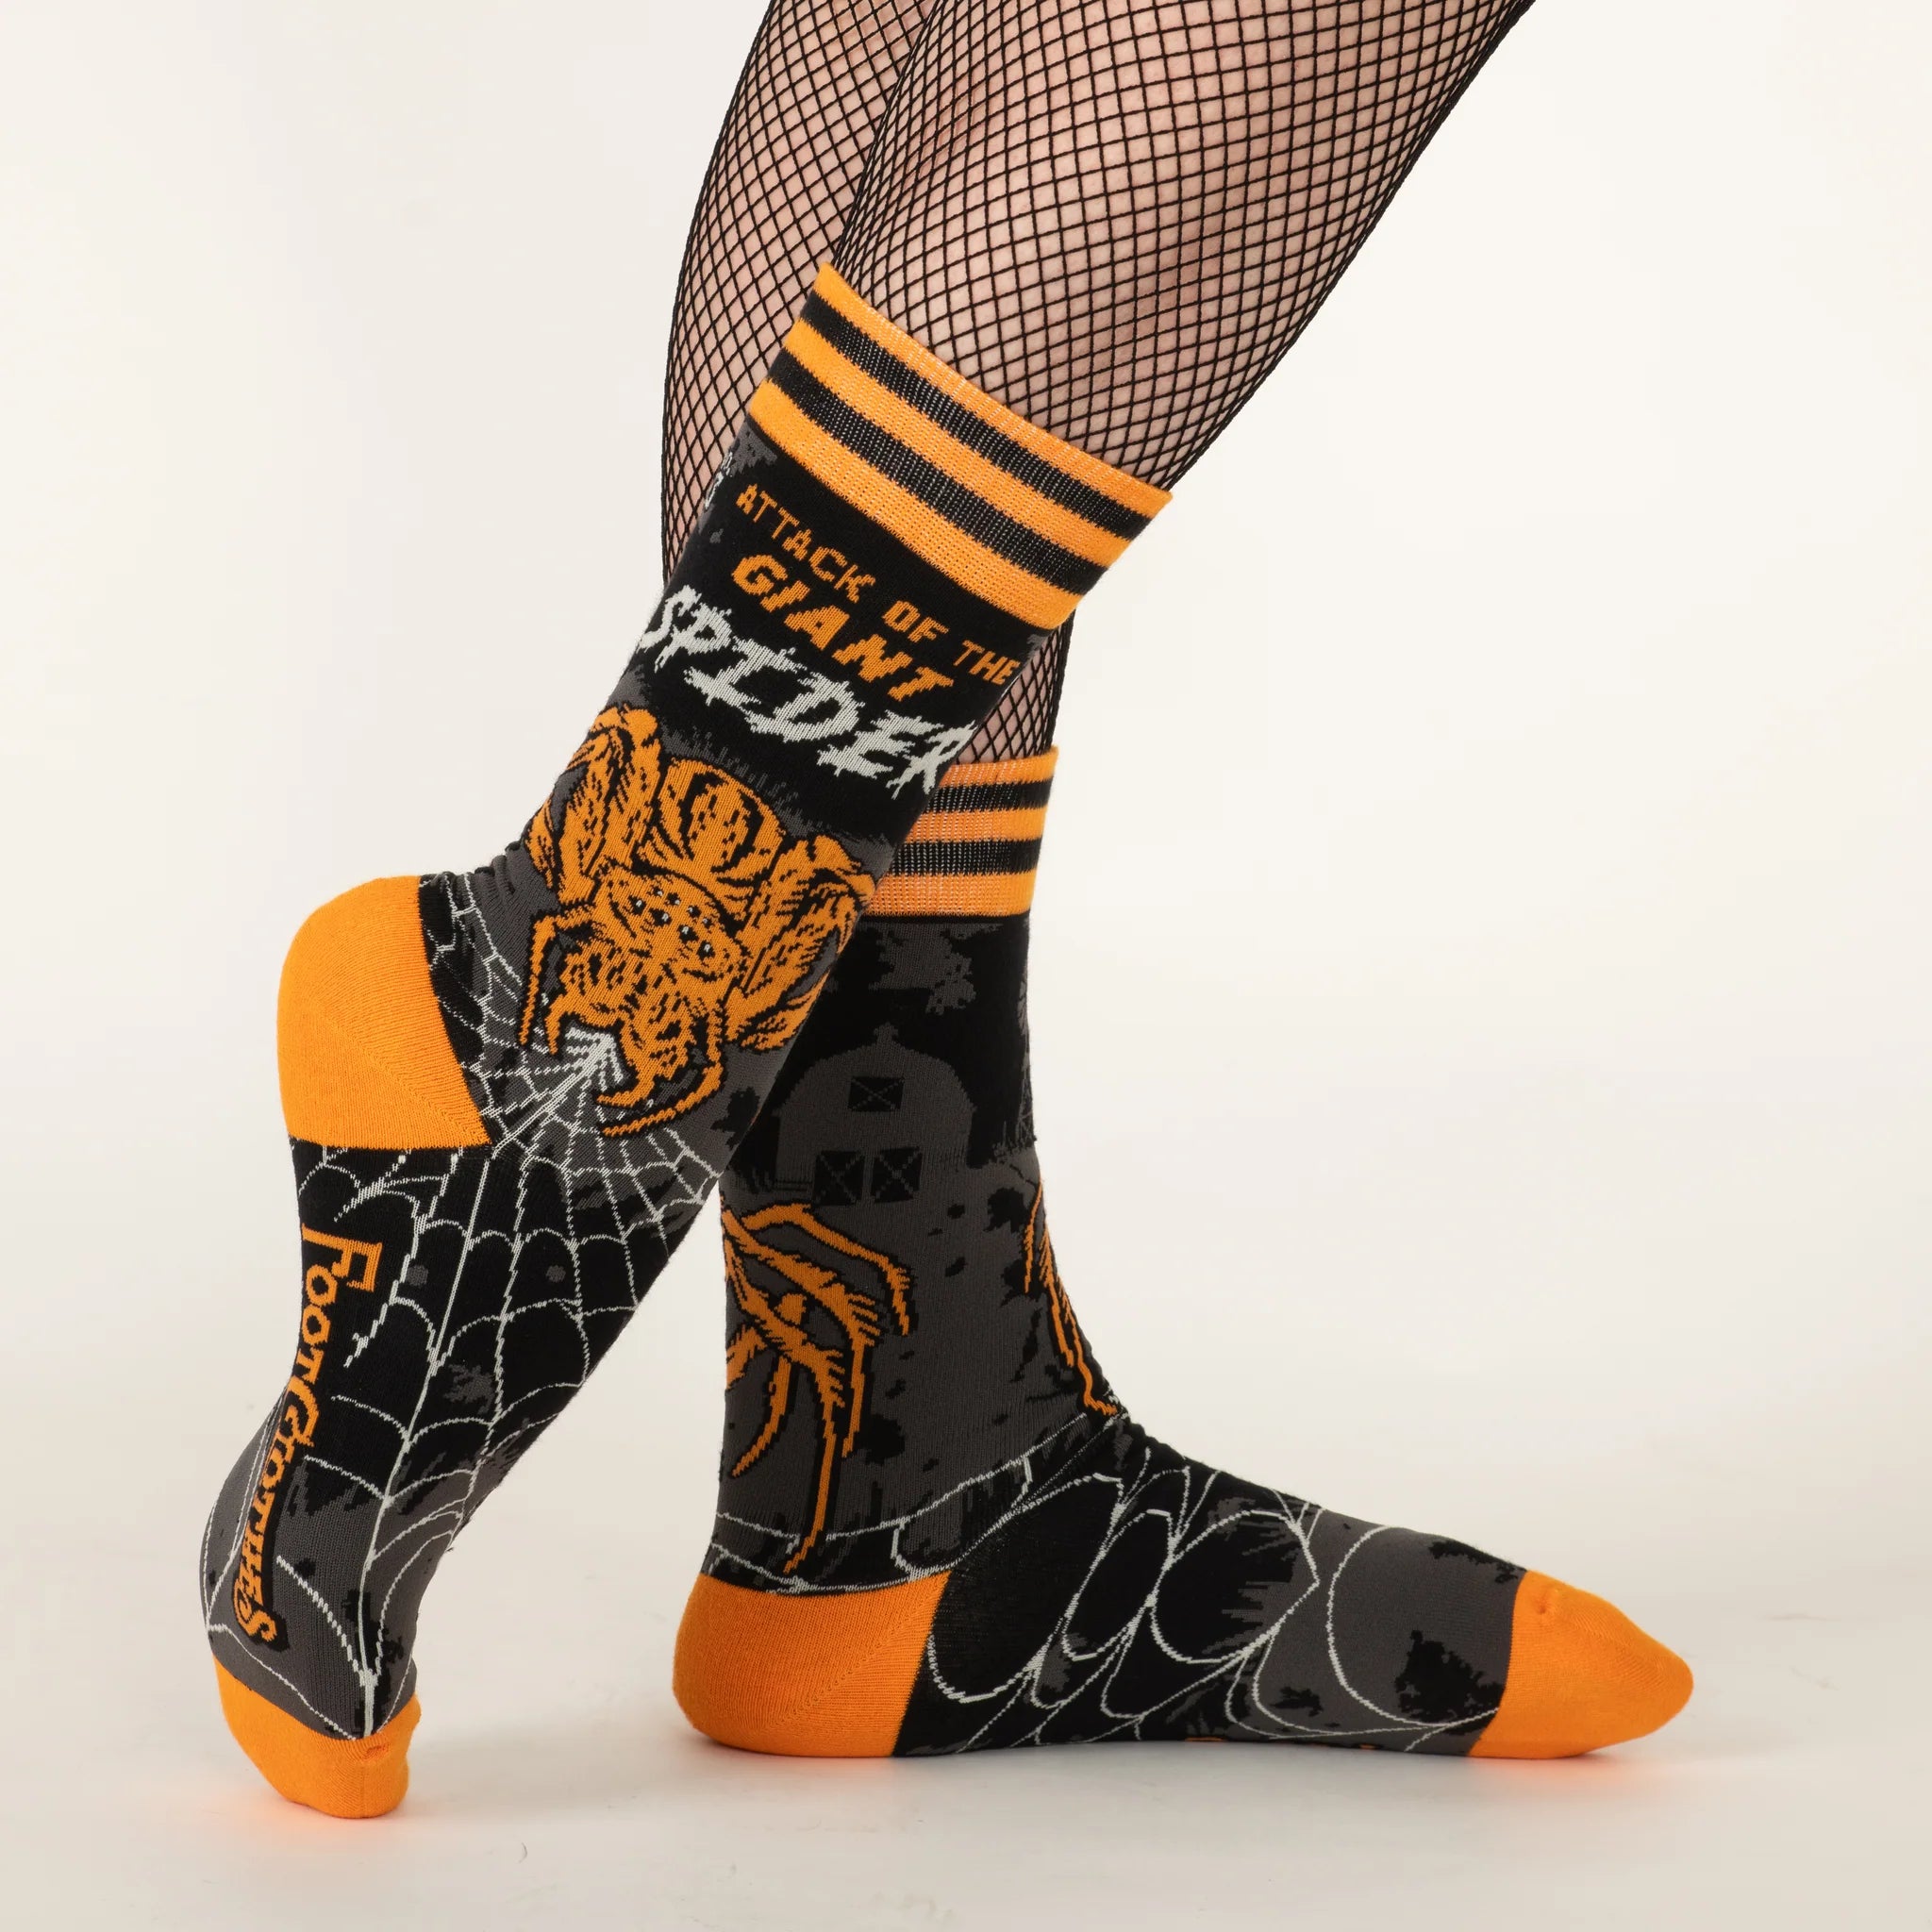 Attack of the Giant Spider Socks | Foot Clothes